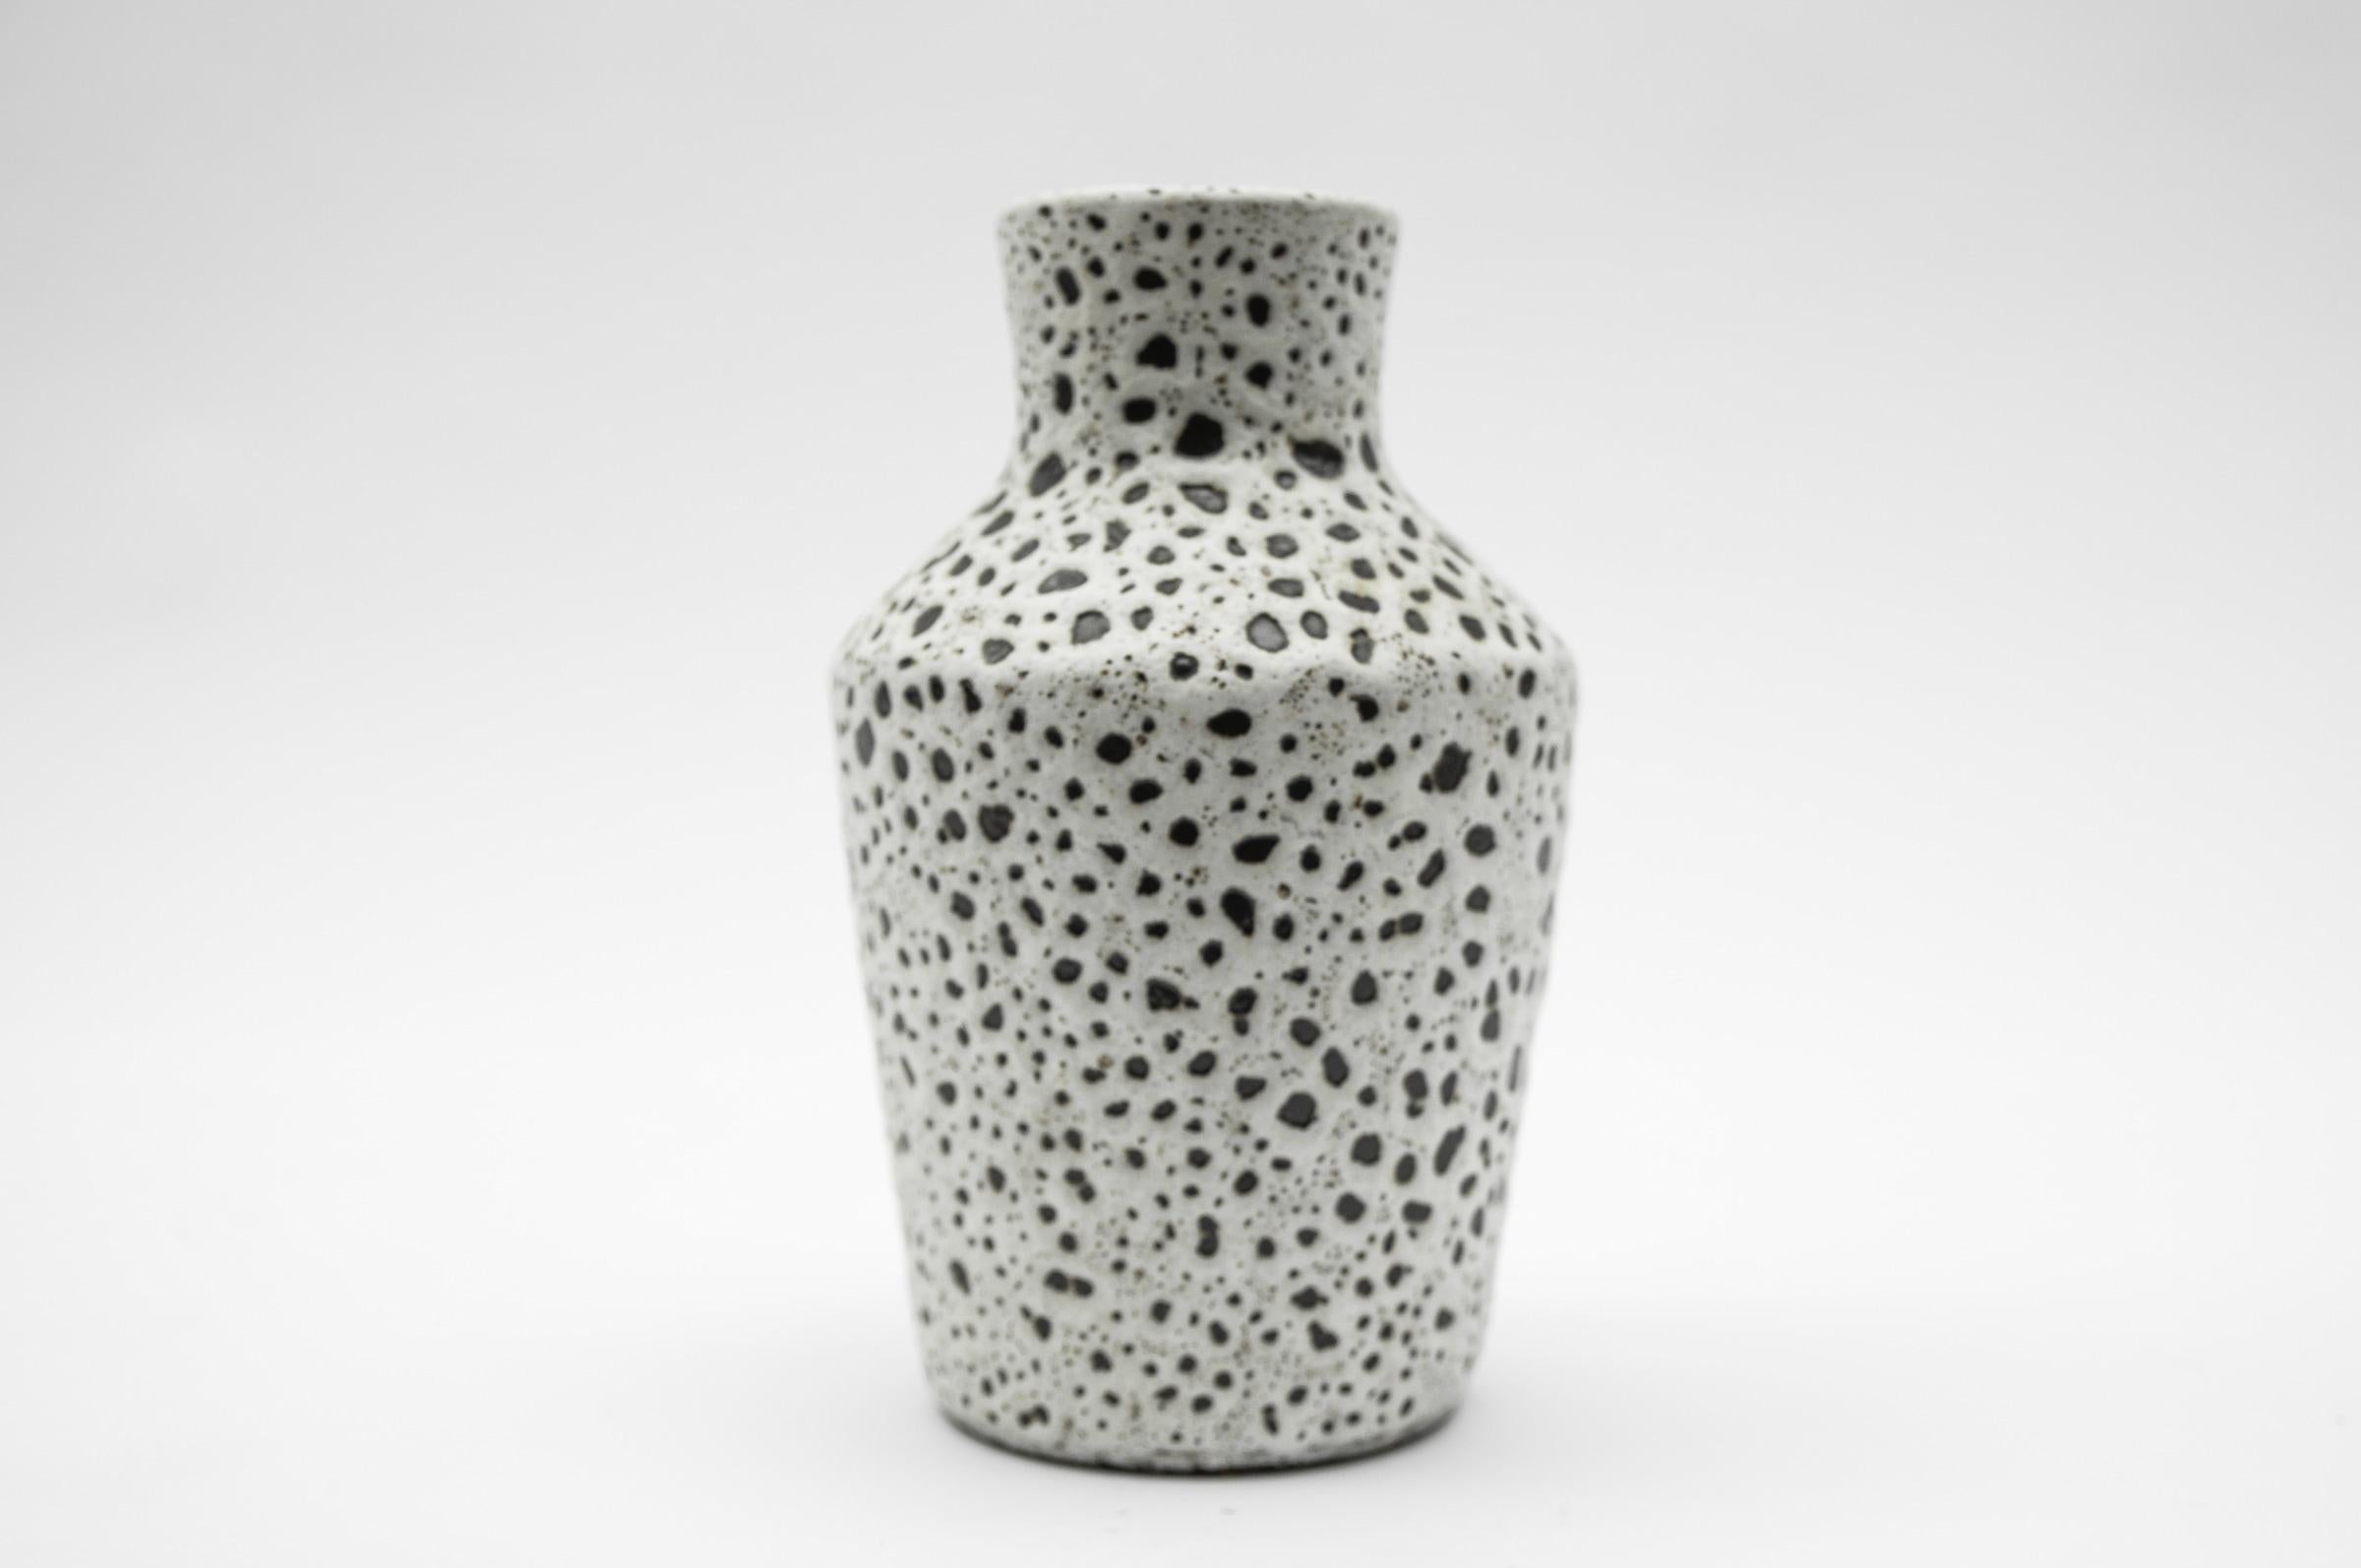 Nice White & Black Studio Ceramic Vase by Wilhelm & Elly Kuch, 1960s, Germany

We have a whole collection of the series for sale here on the platform. 

Very good condition.

------------------------------

Wilhelm Kuch, born 1925, 1947